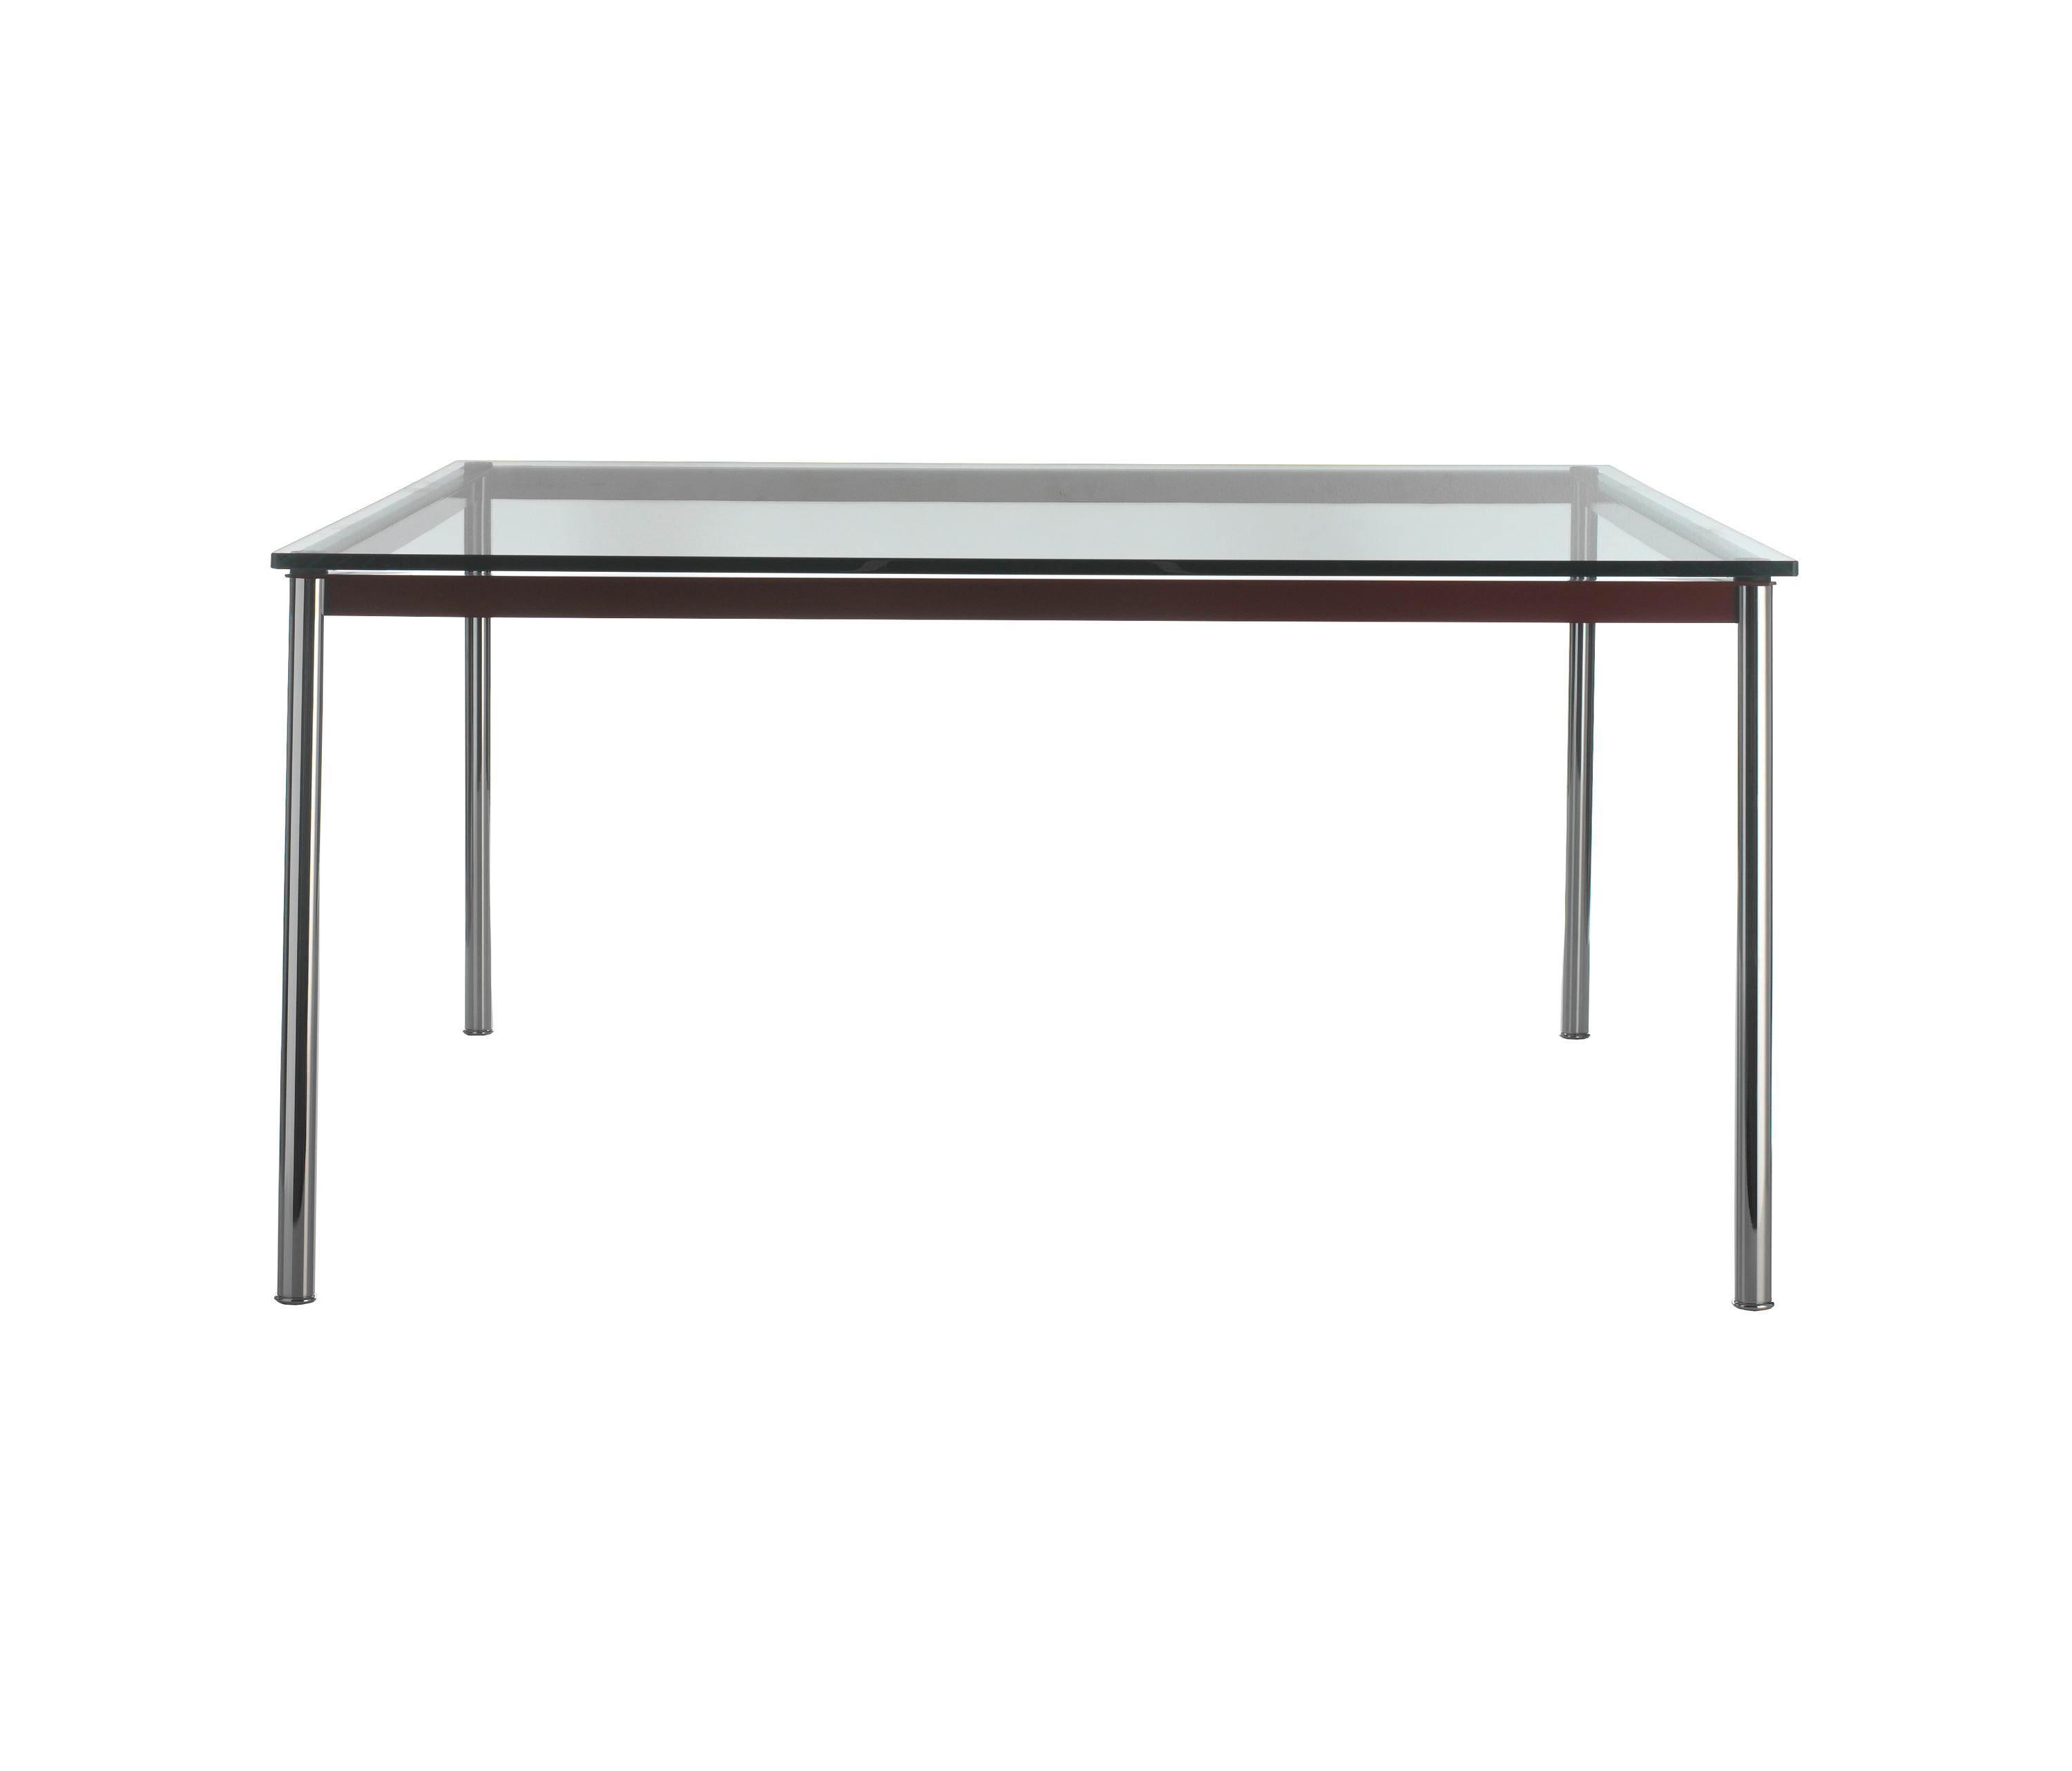 Lc10 P Dining Tables From Cassina Architonic